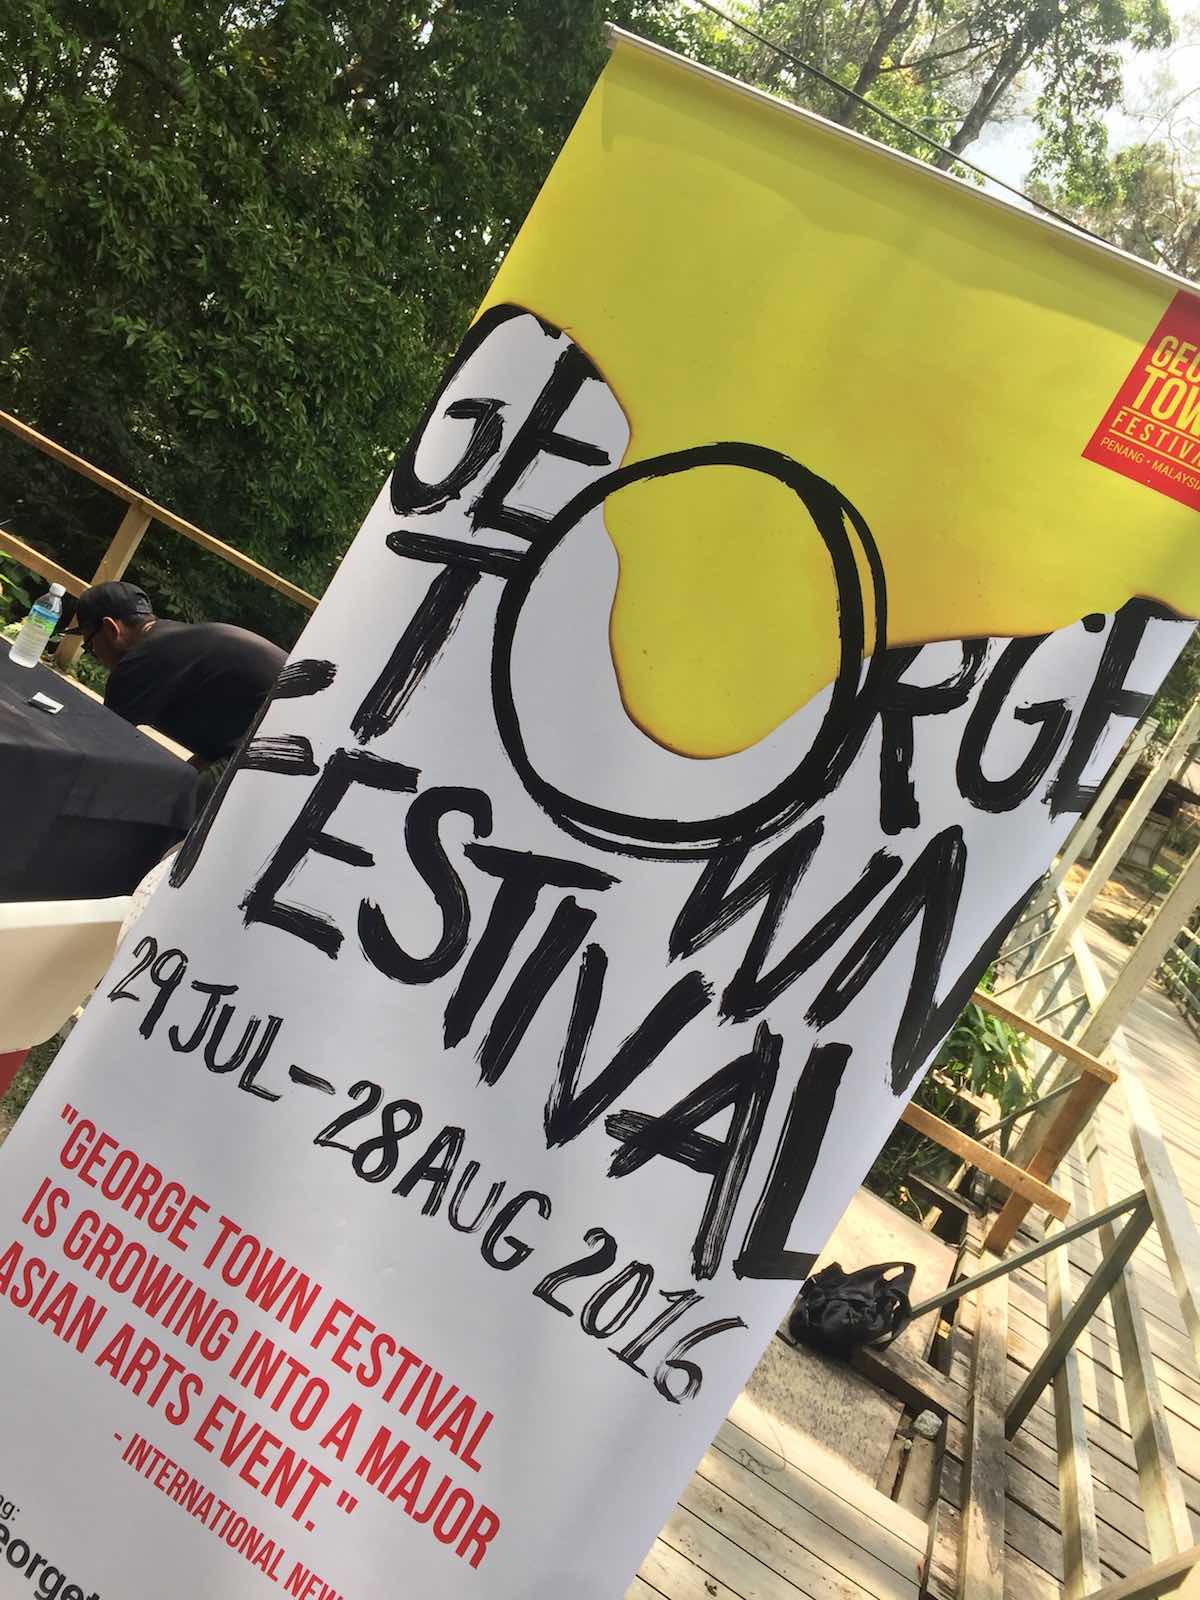 George Town Festival 2016